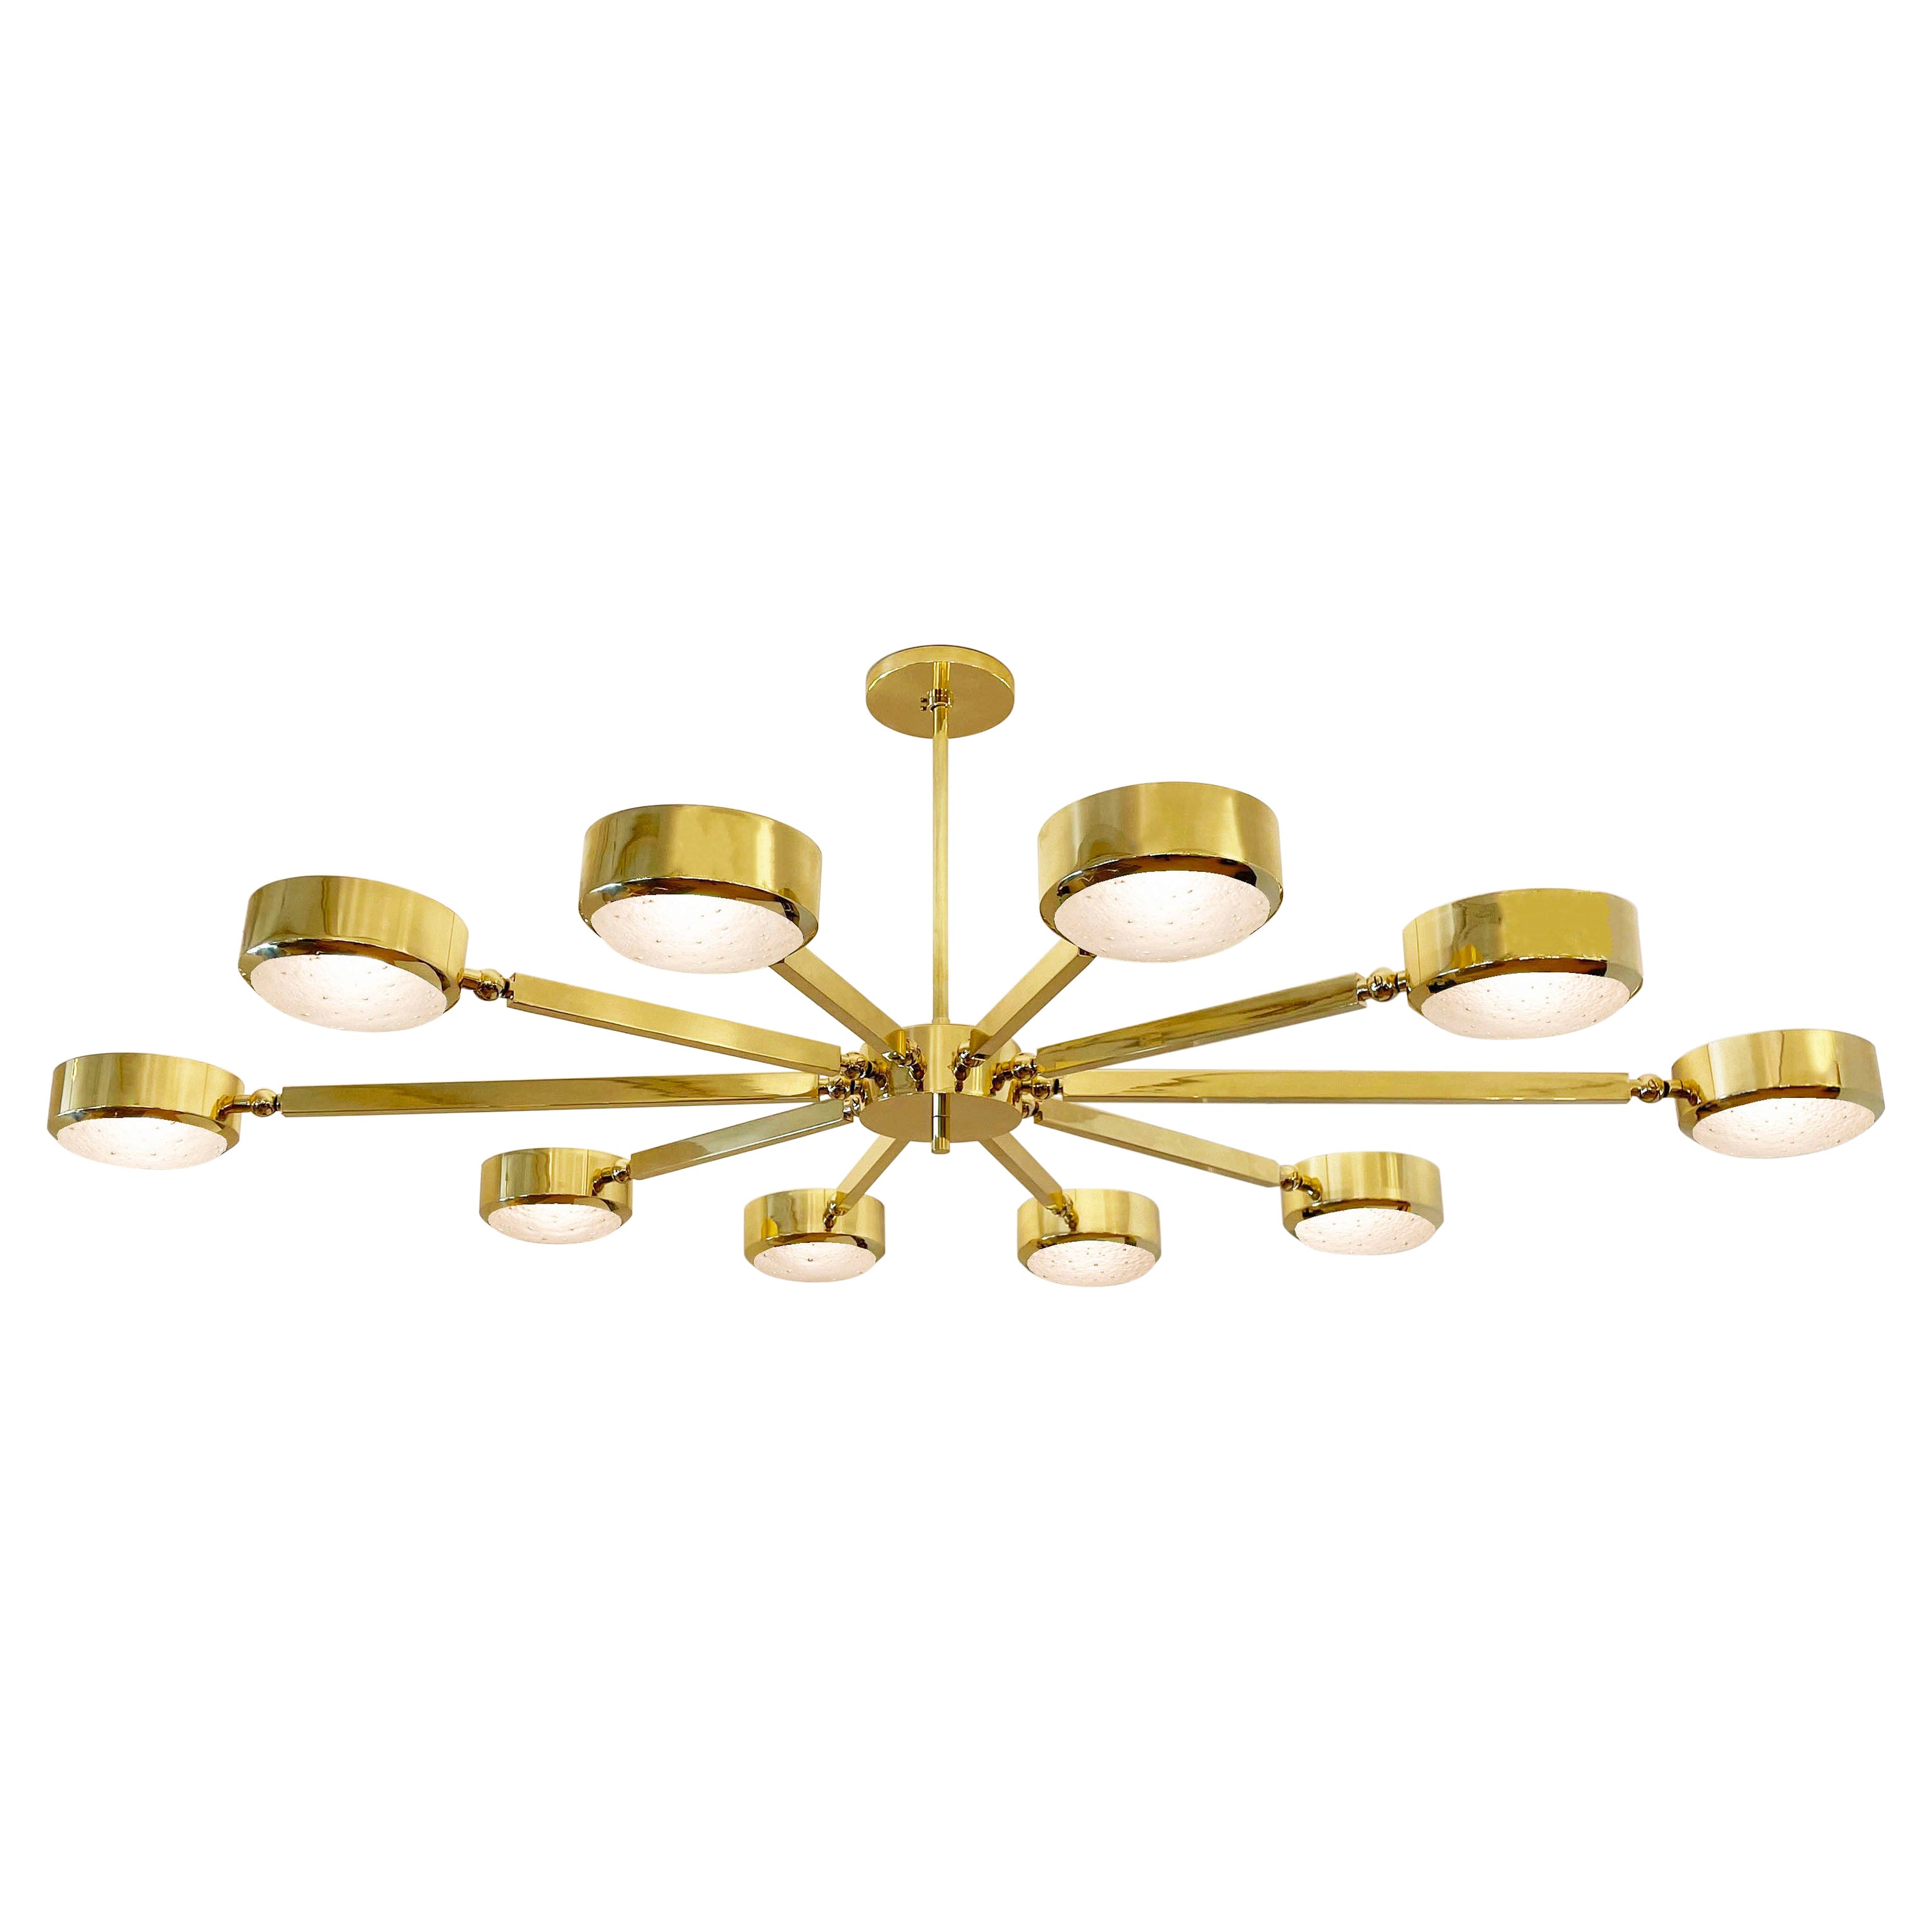 Oculus Oval Ceiling Light by Gaspare Asaro- Polished Brass with Murano Glass